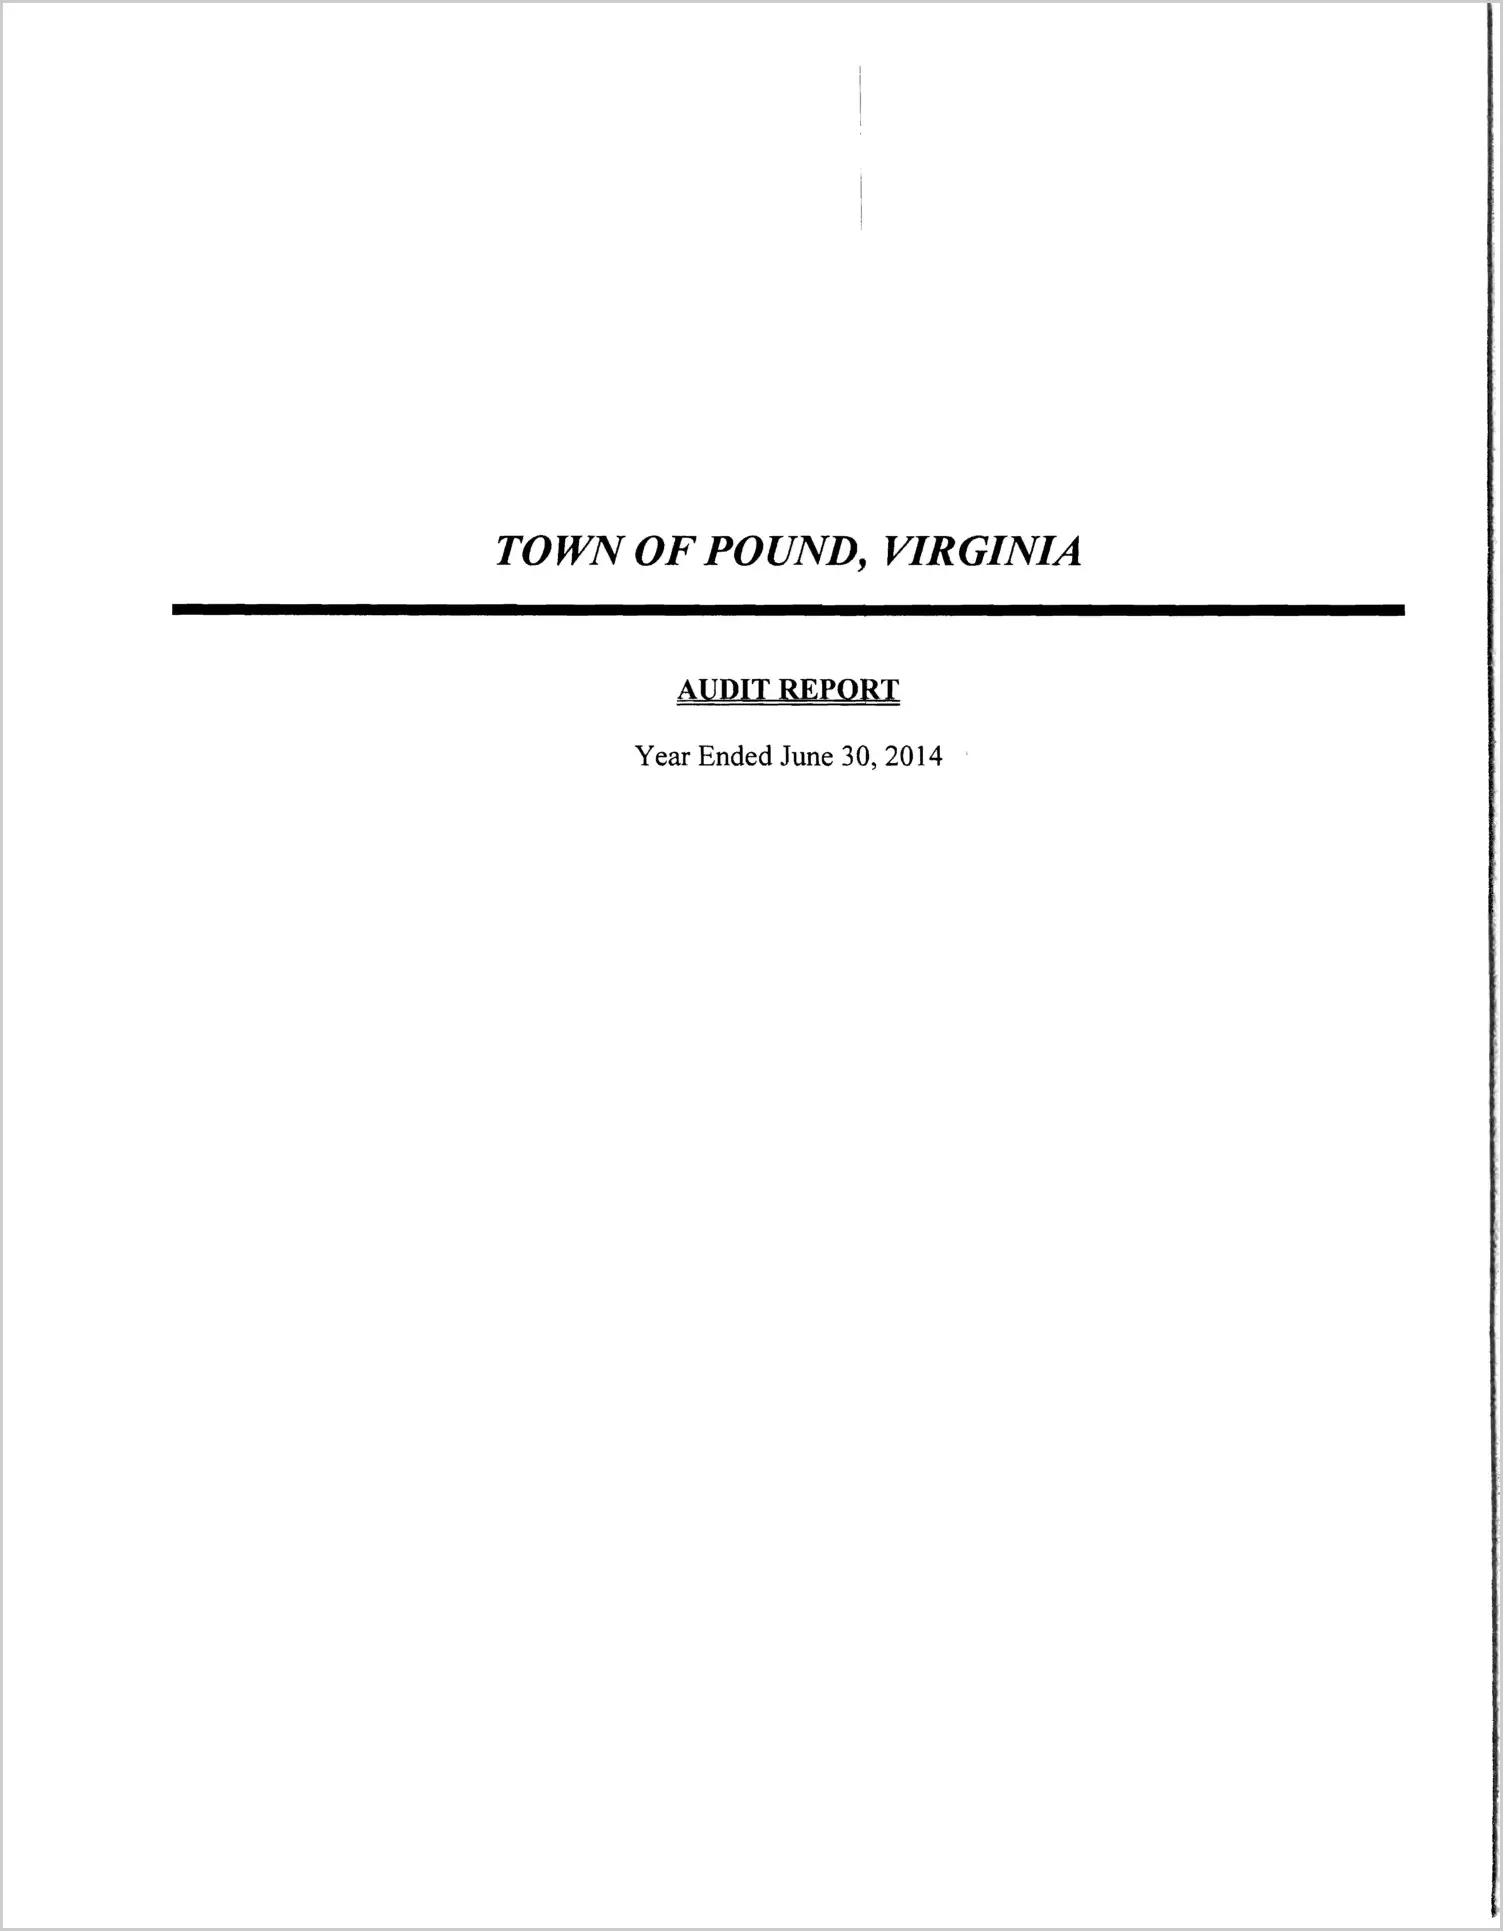 2014 Annual Financial Report for Town of Pound